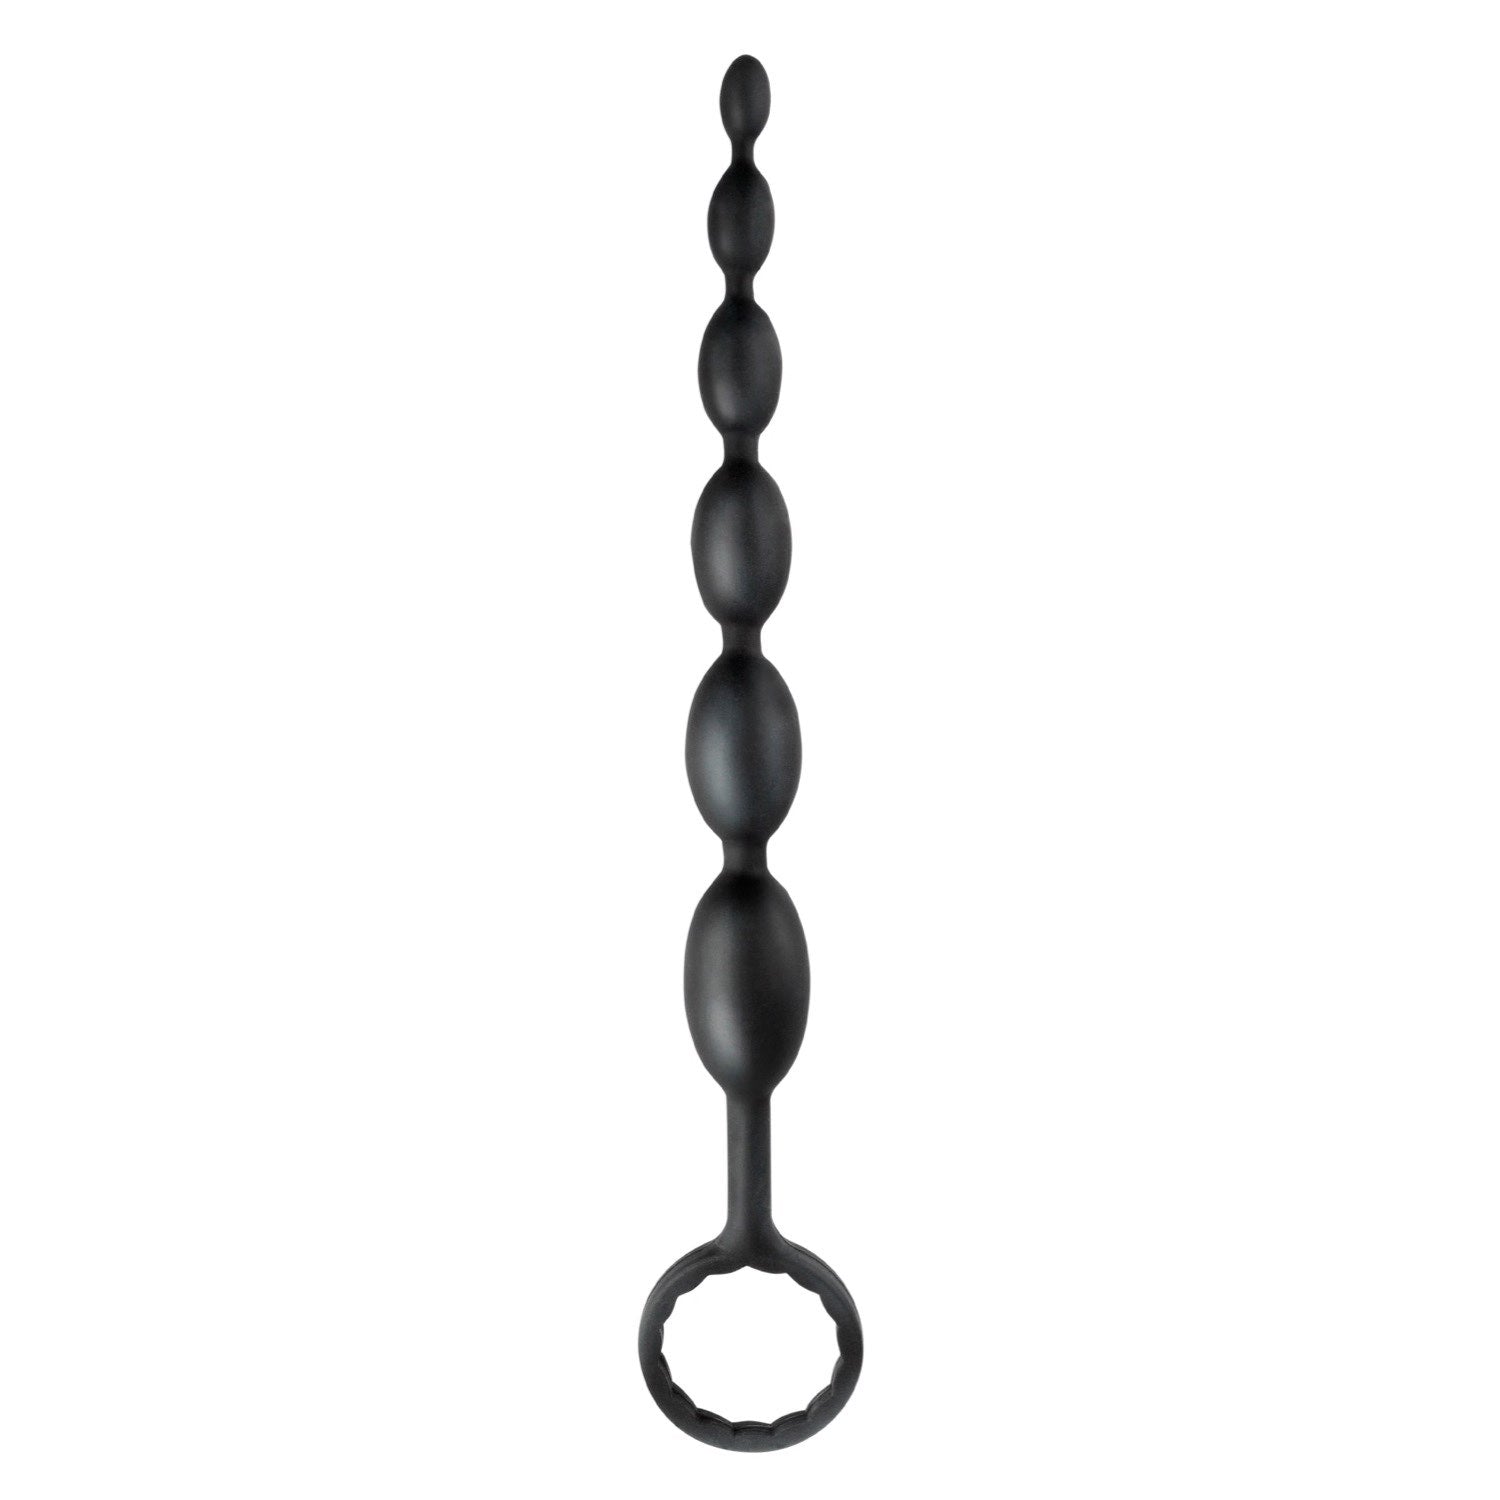 Anal Fantasy Collection First-Time Fun Beads - Black 21 cm (8.25&quot;) Anal Beads by Pipedream